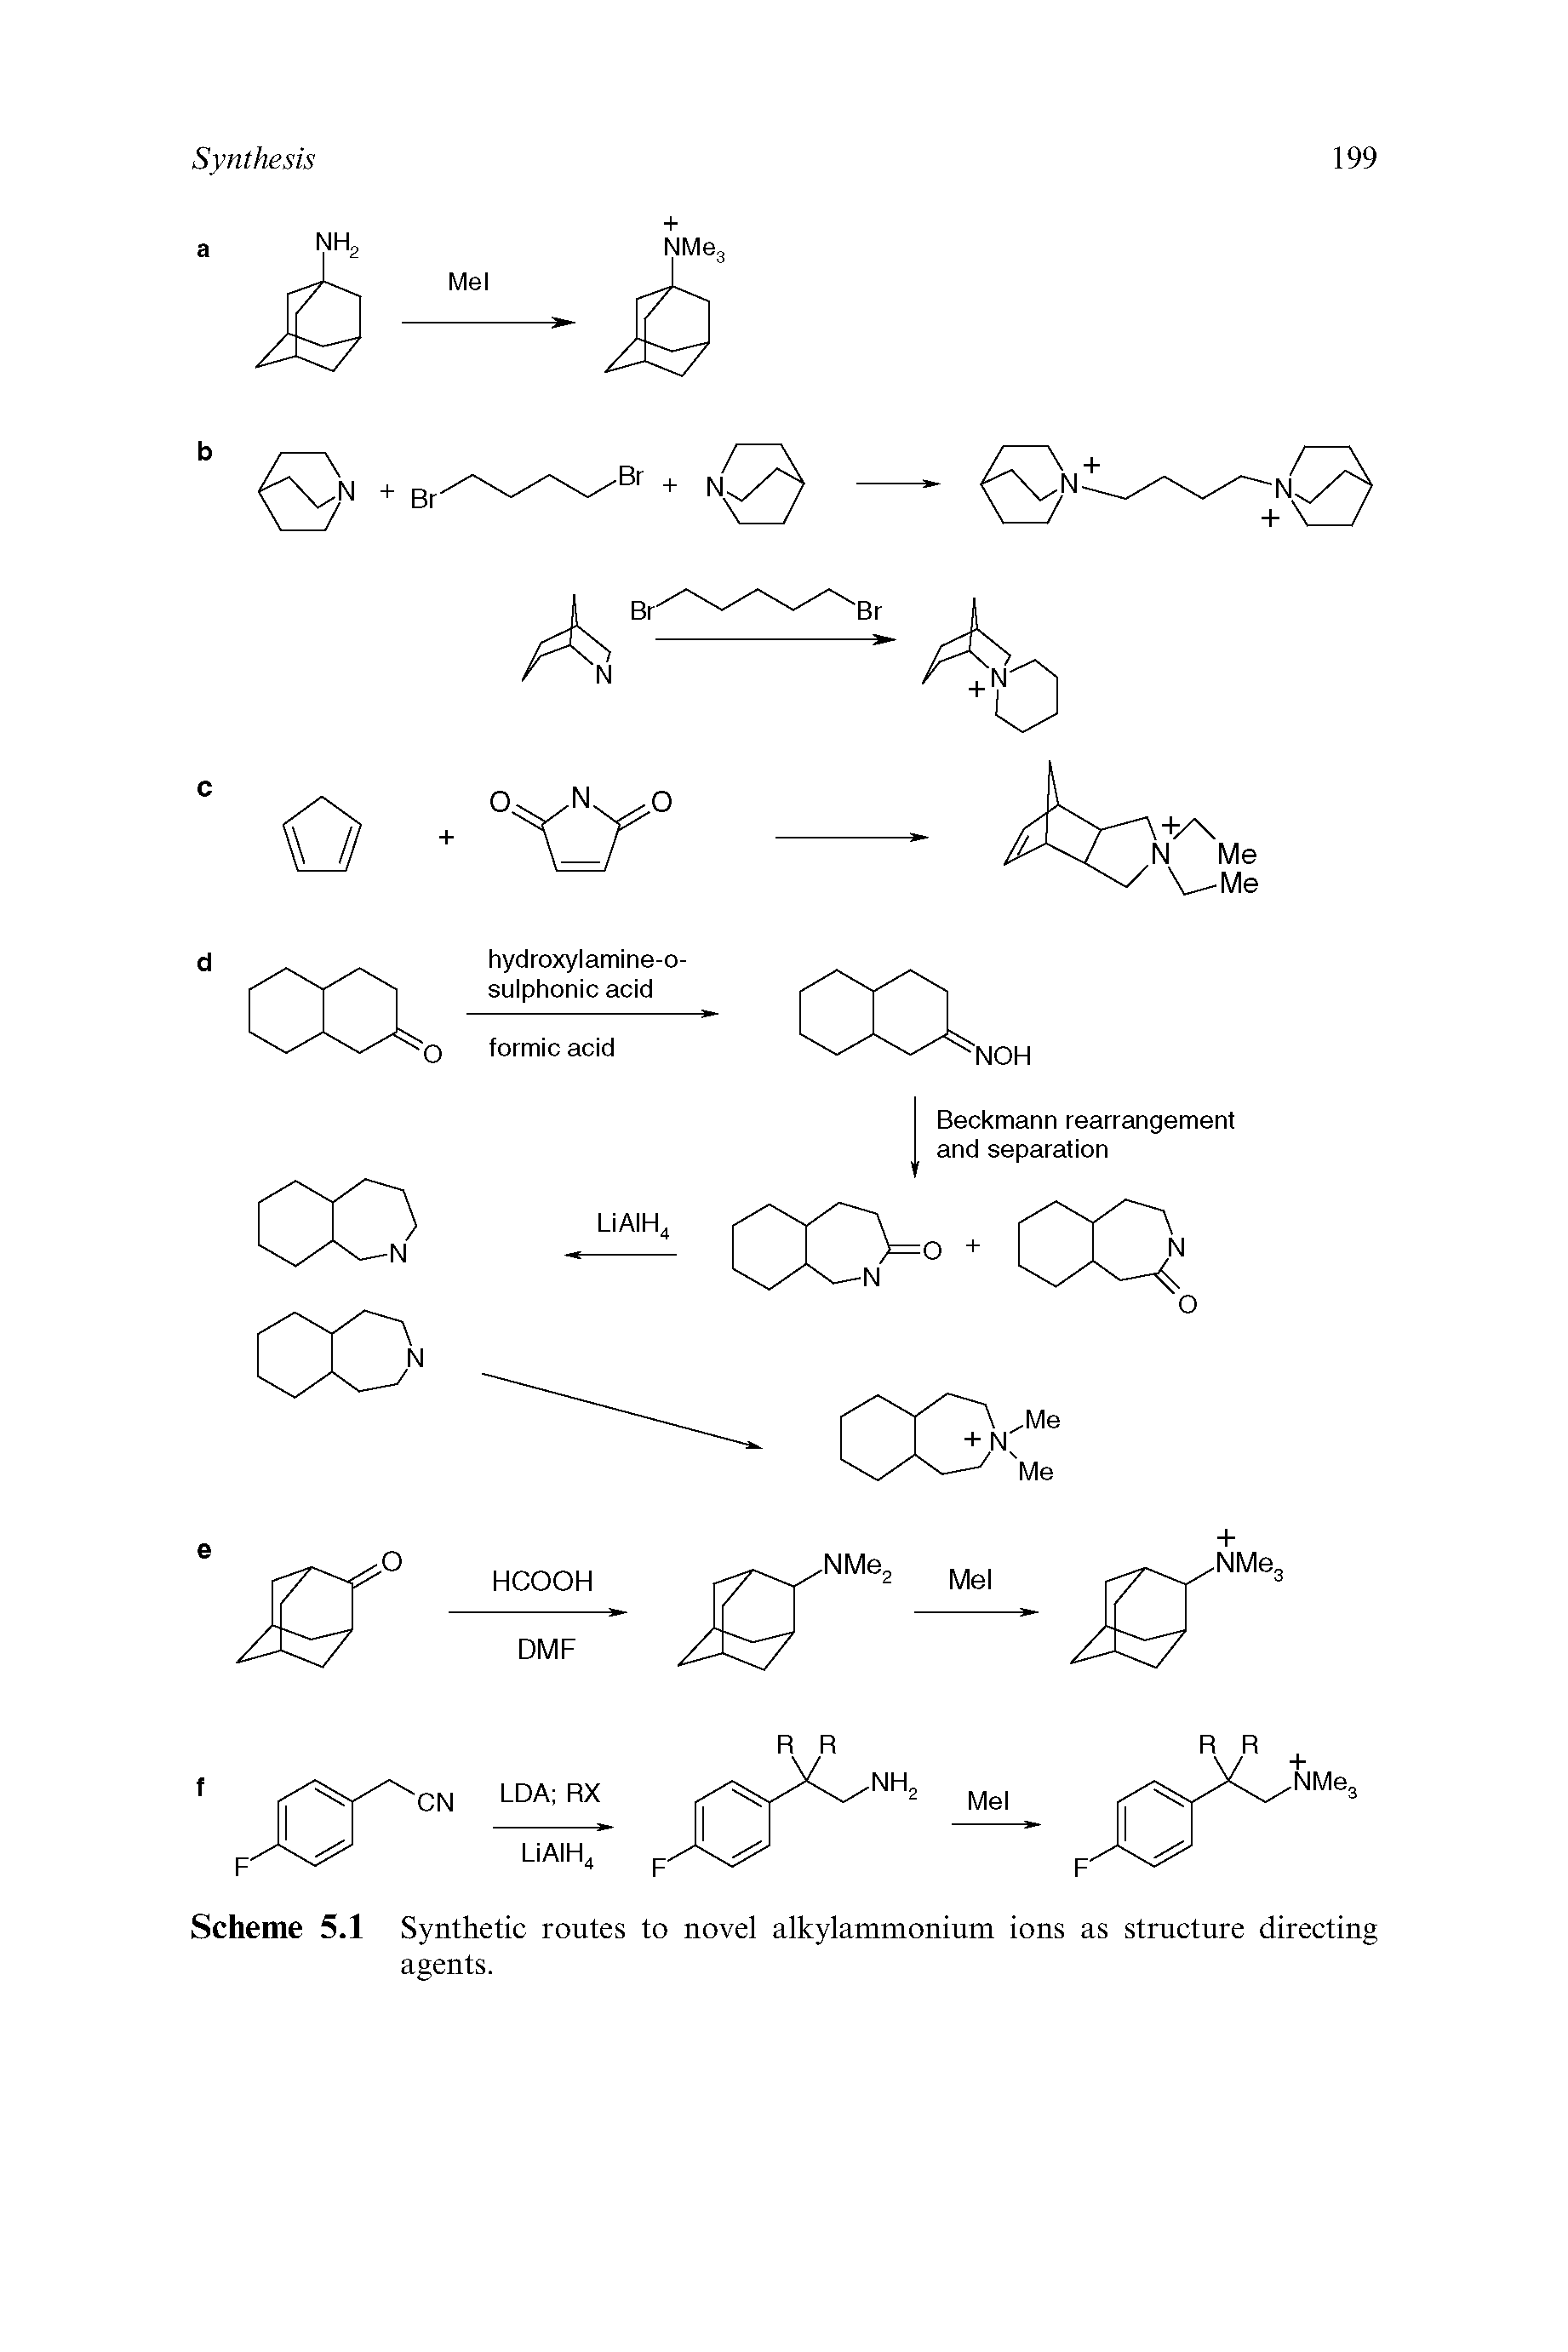 Scheme 5.1 Synthetic routes to novel alkylammonium ions as structure directing agents.